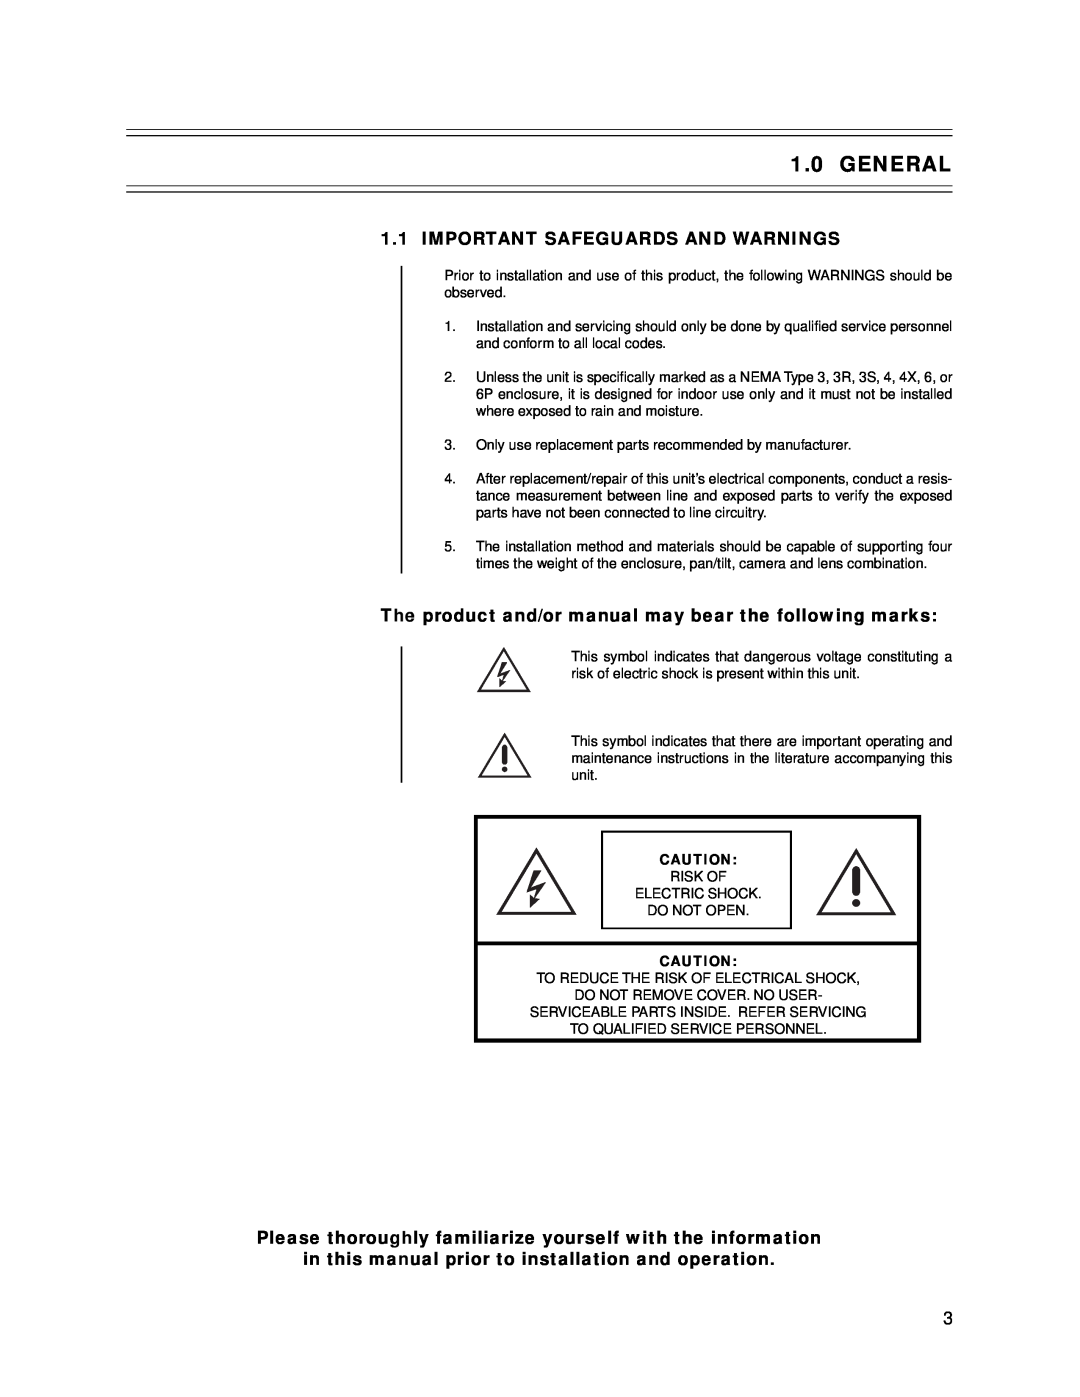 Bosch Appliances tc9346a General, Important Safeguards And Warnings, in this manual prior to installation and operation 